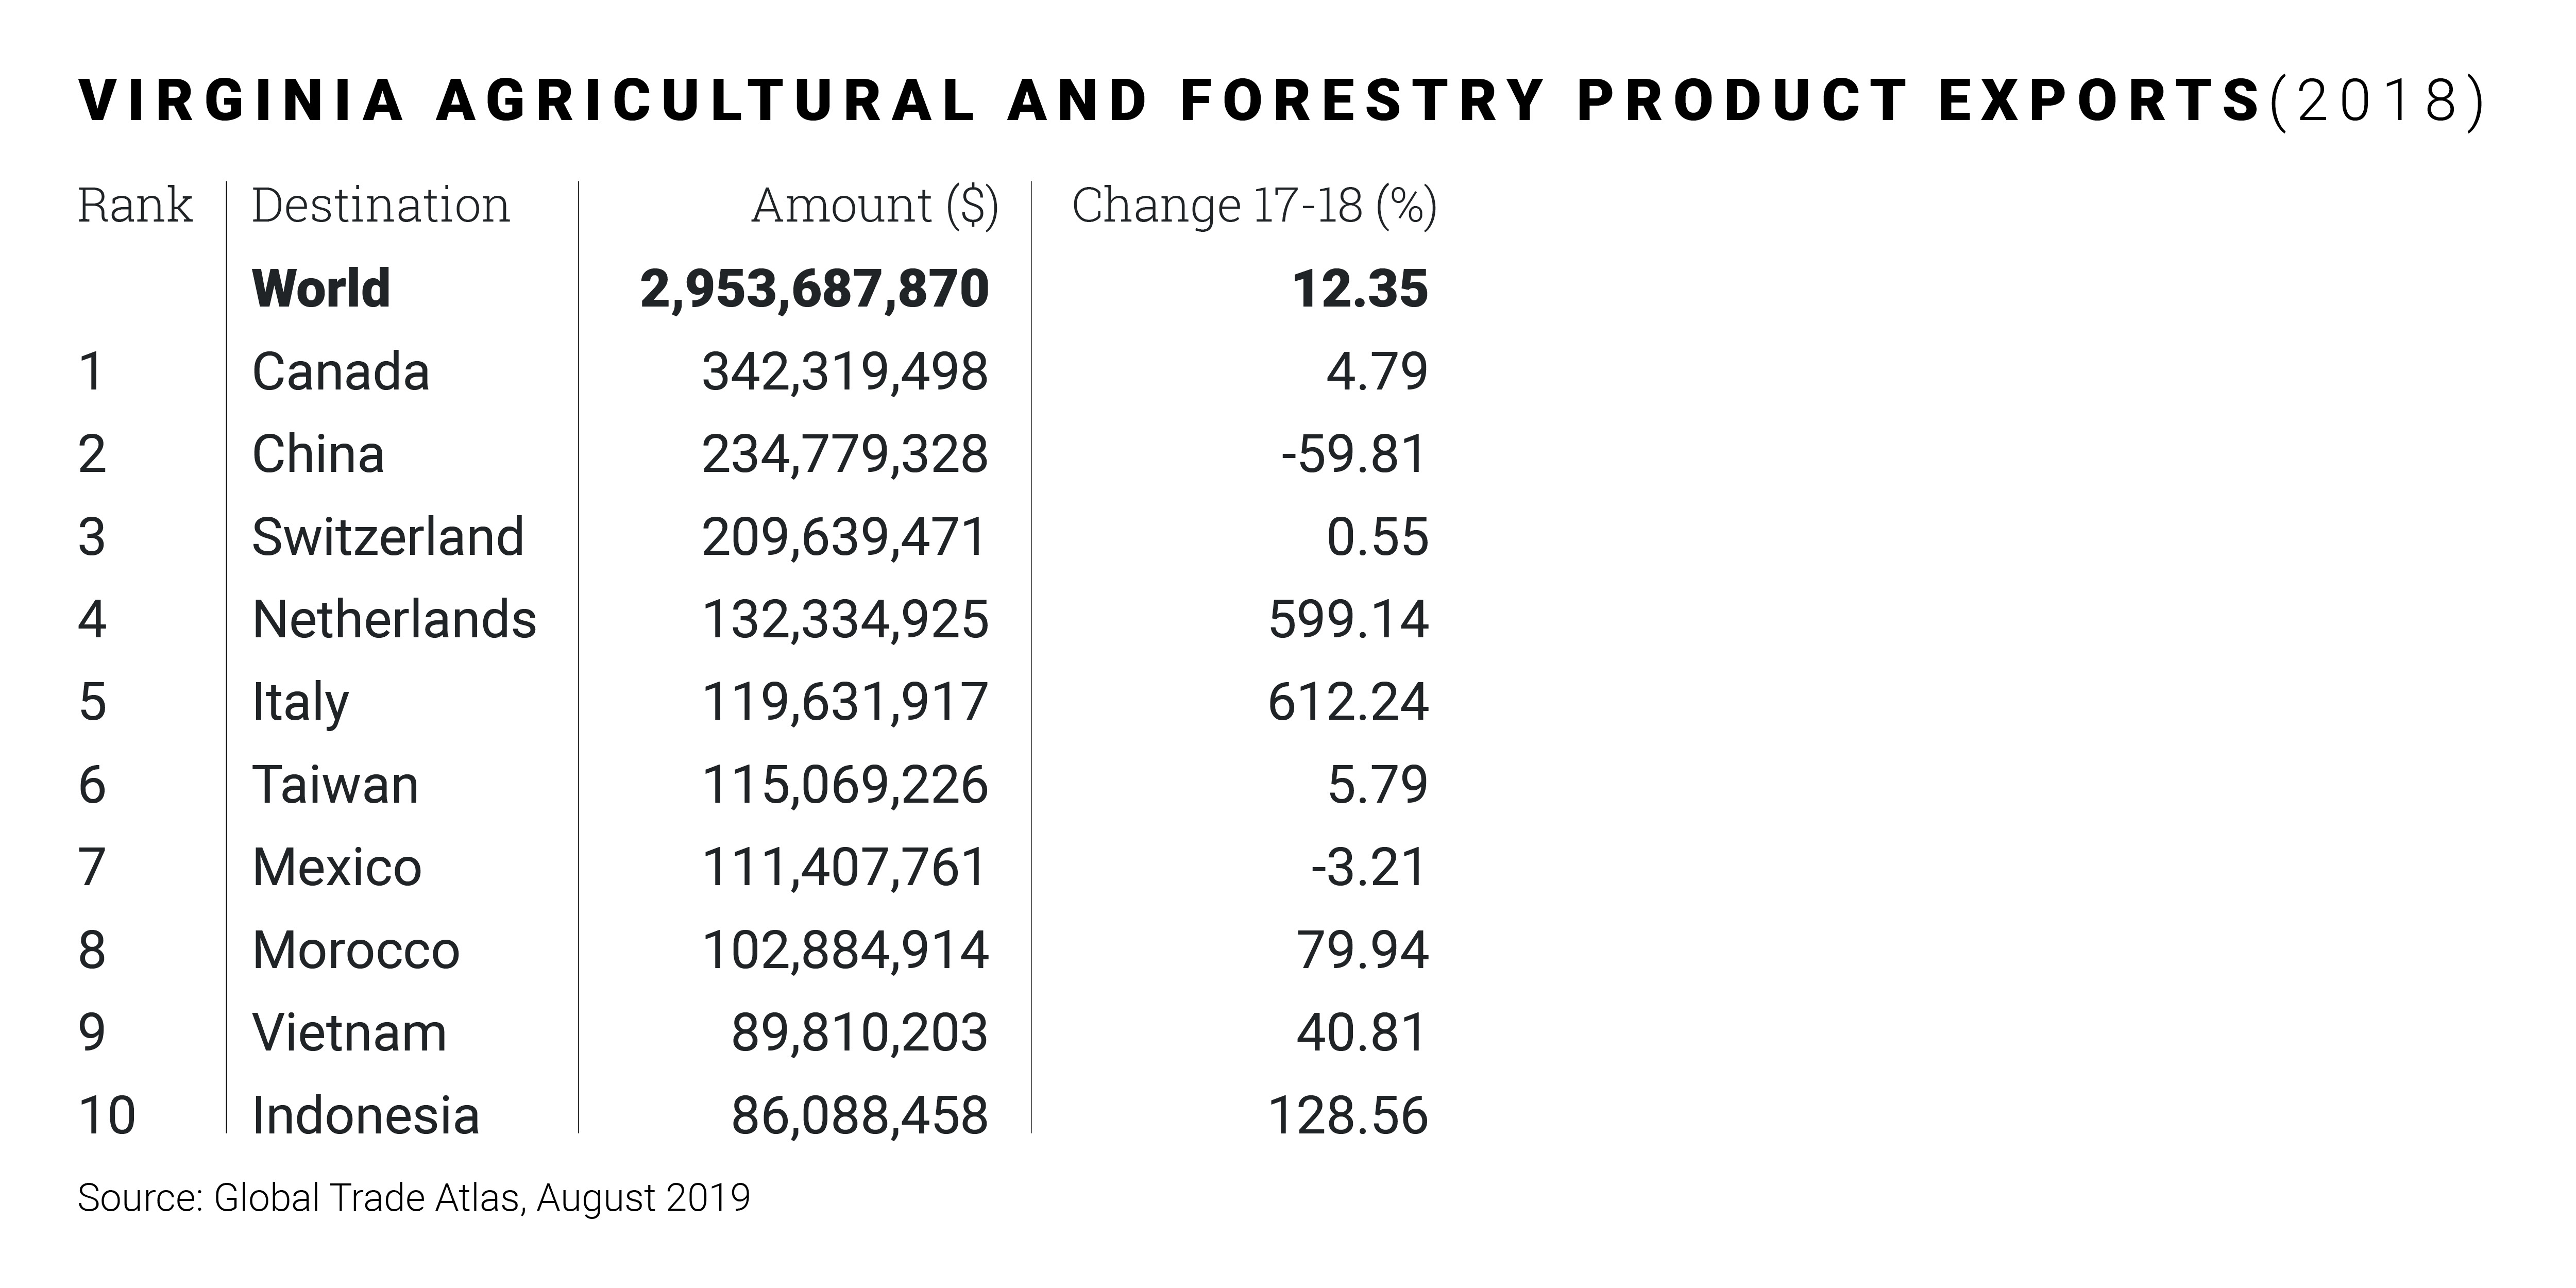 Virginia Agricultural and Forestry Product Exports (2018)